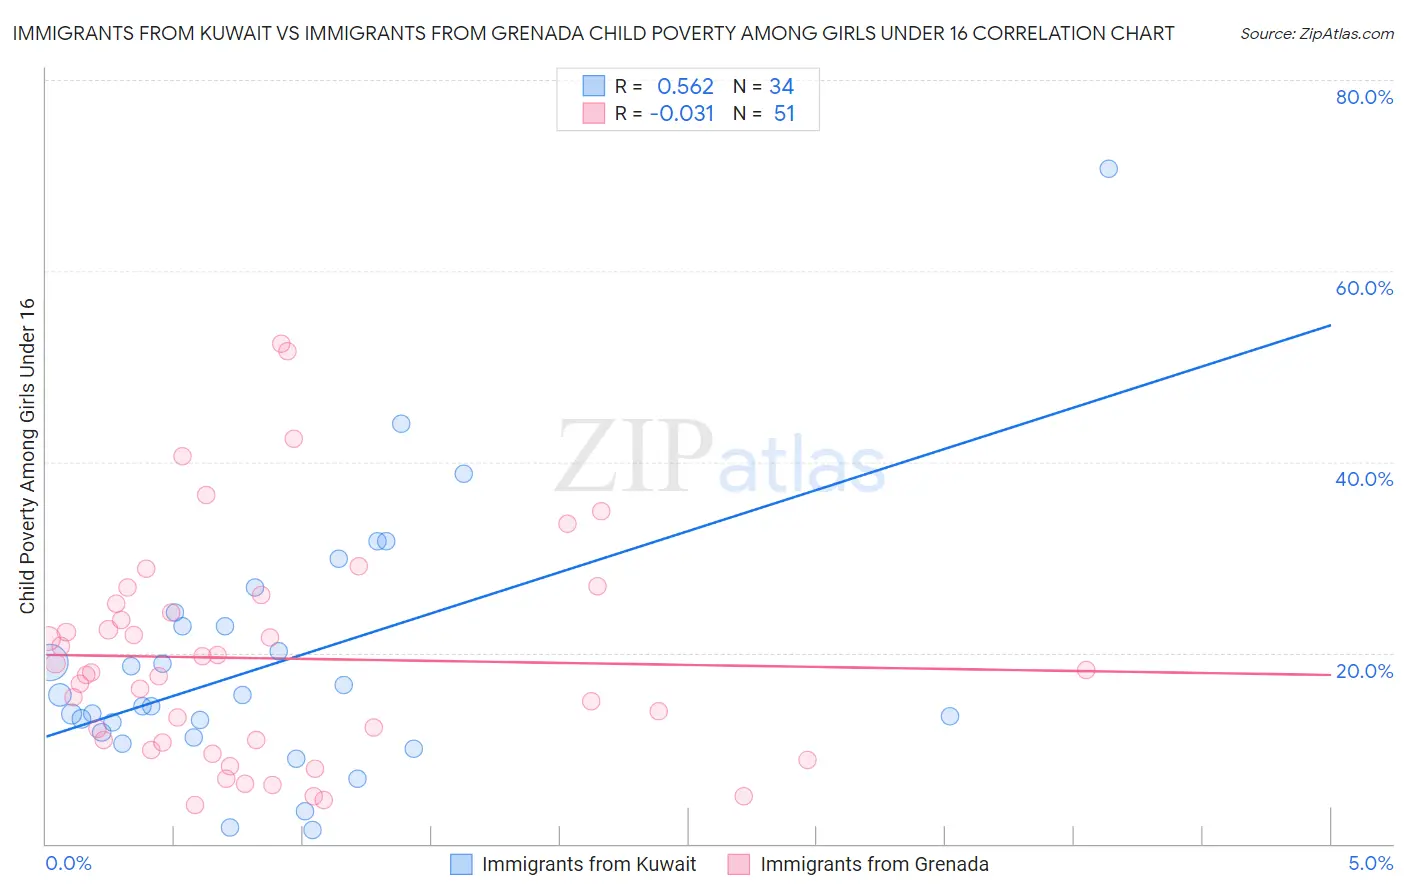 Immigrants from Kuwait vs Immigrants from Grenada Child Poverty Among Girls Under 16